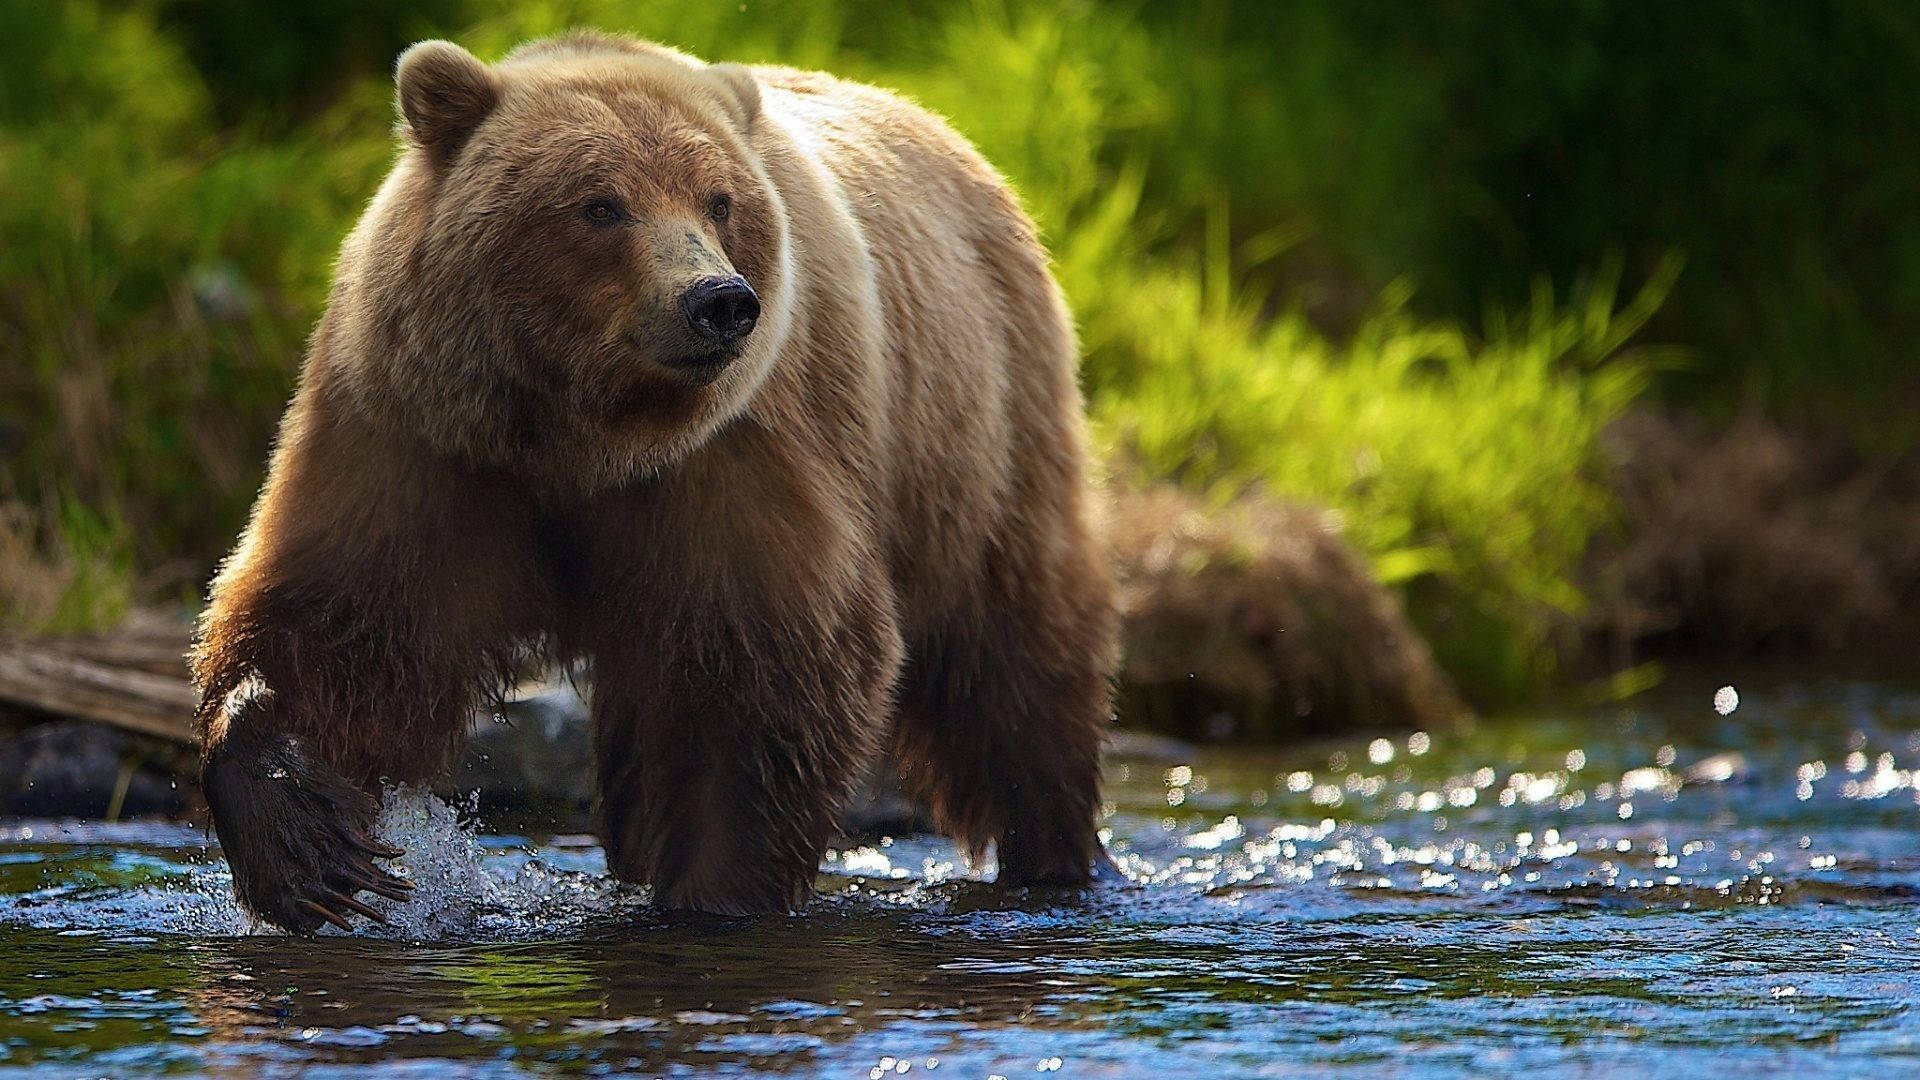 "Exploring the Wilds of Nature With a Grizzly Bear" Wallpaper